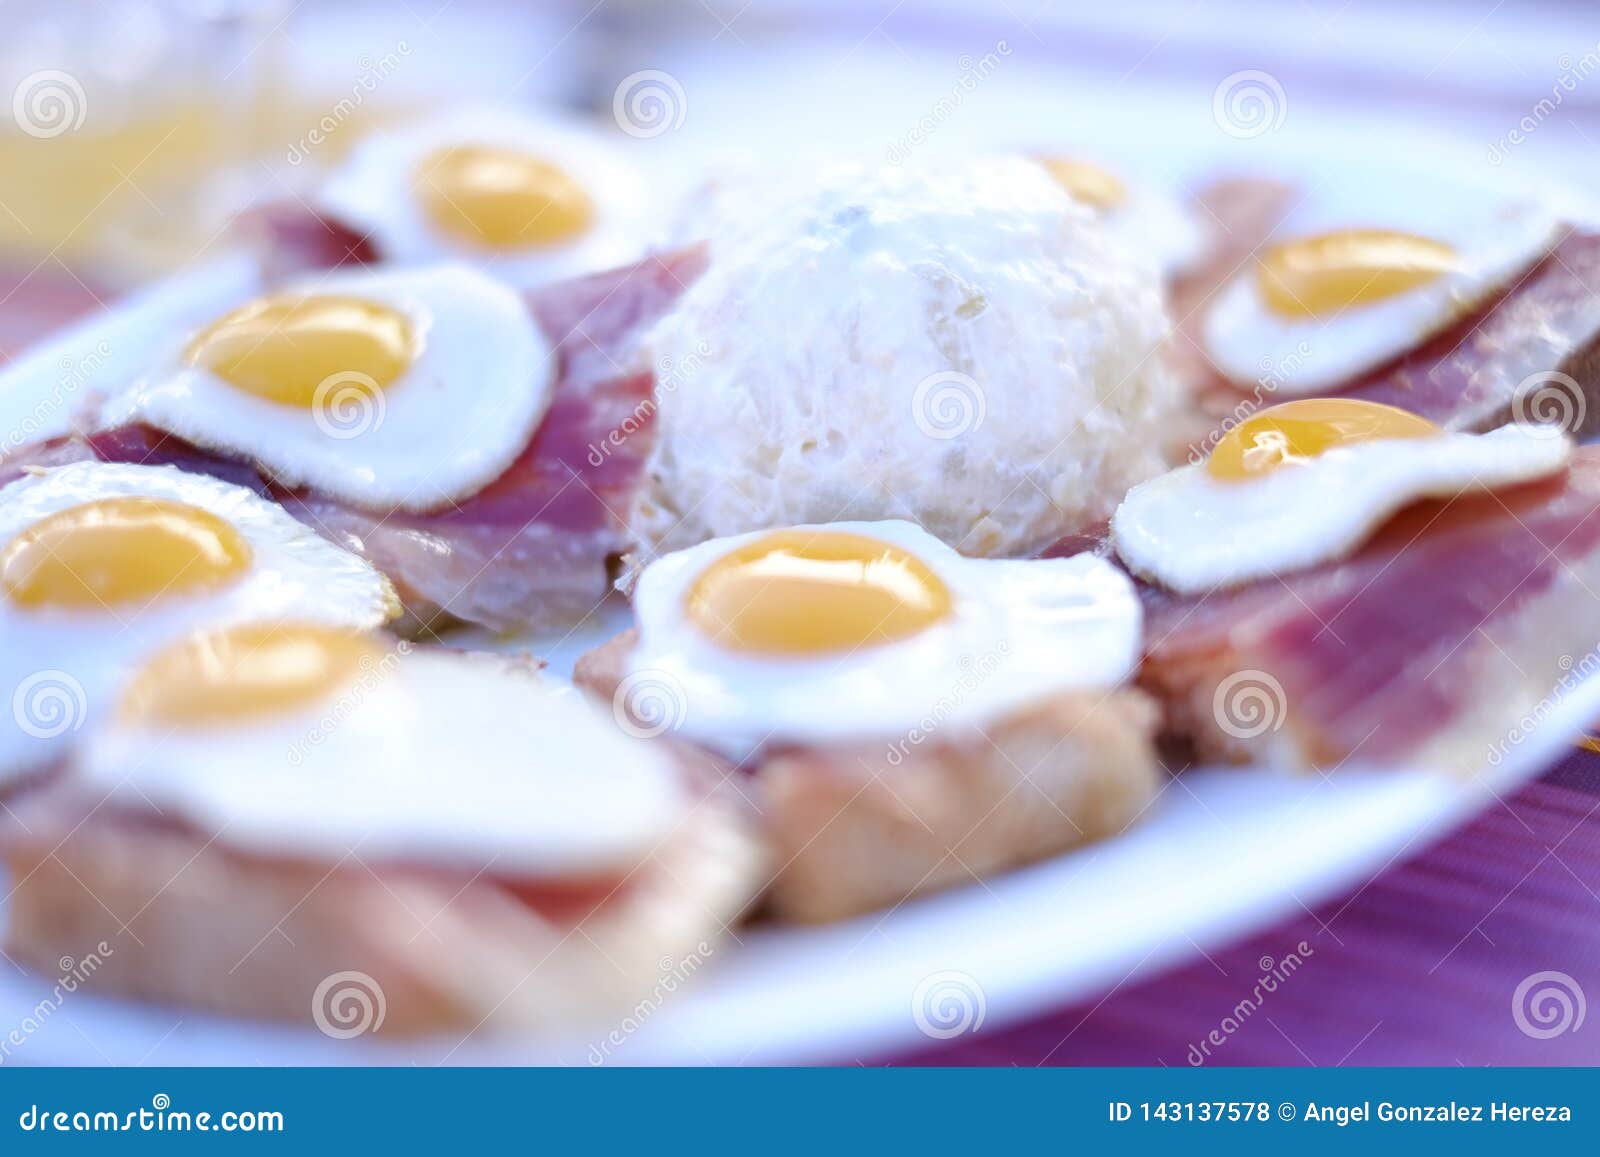 quail eggs, ham and salad from seville